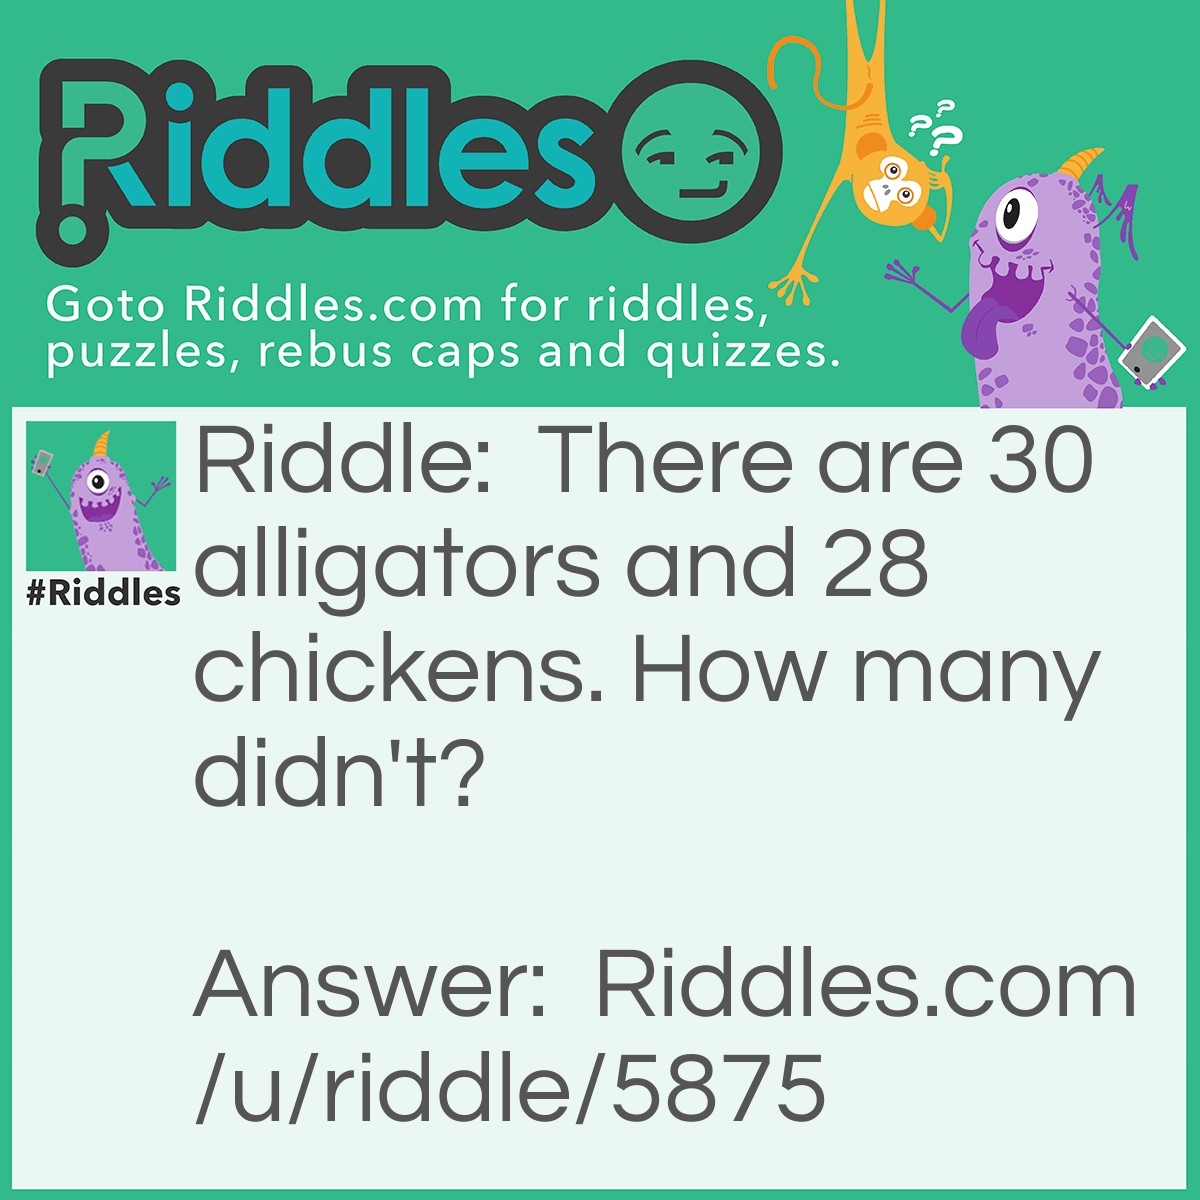 Riddle: There are 30 alligators and 28 chickens. How many didn't? Answer: 10. 20 ate chickens not 28.